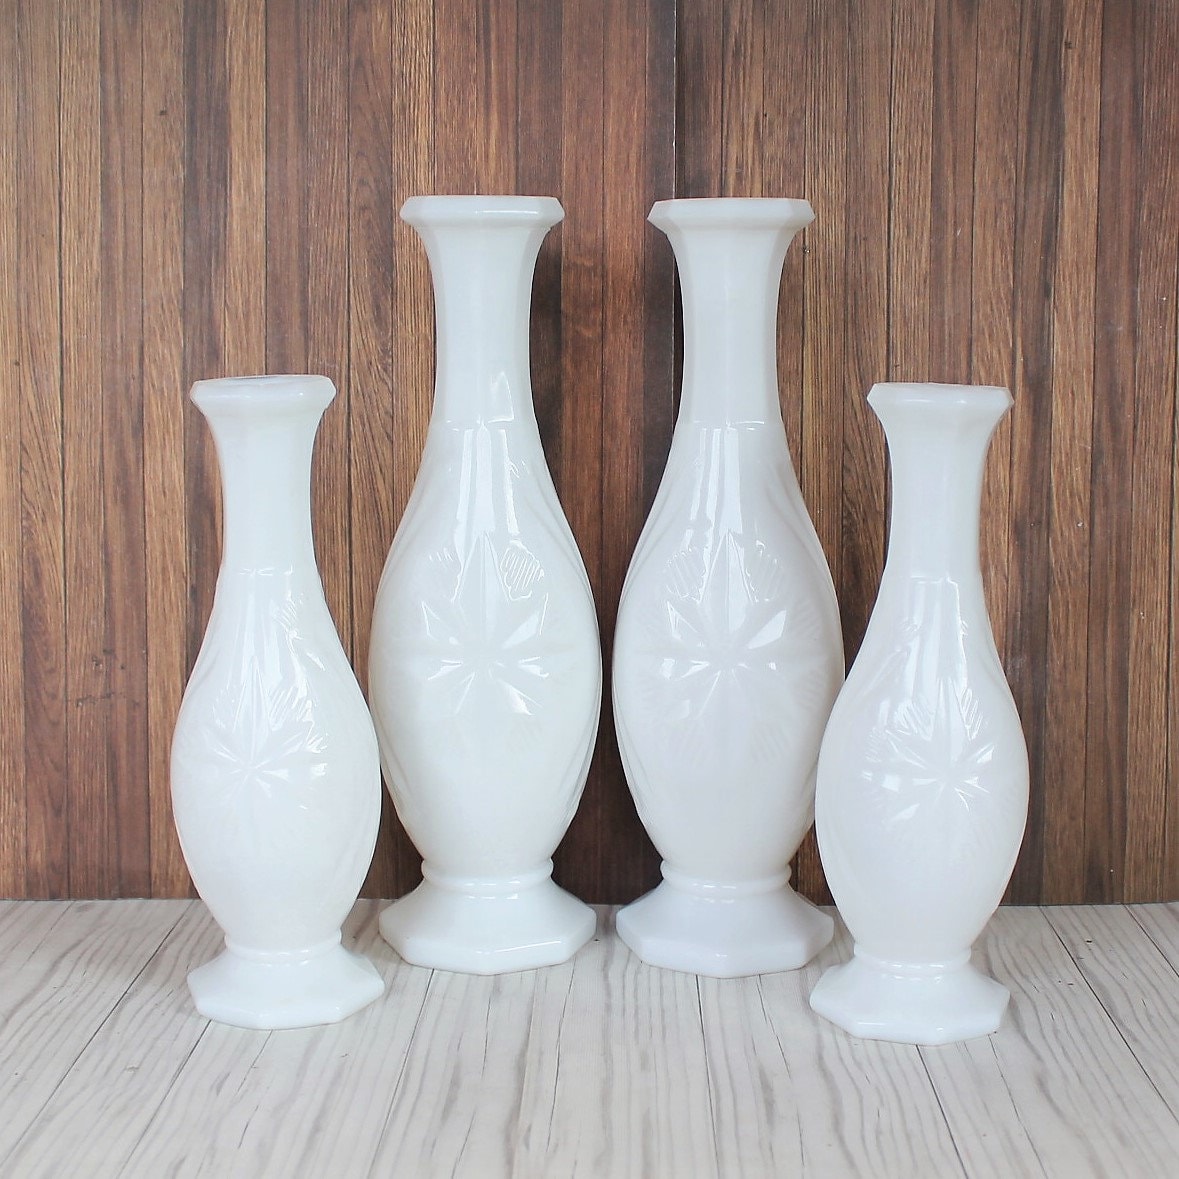 Vintage Milk Glass Vase Set Of 4 White Vases Large And Small Matched